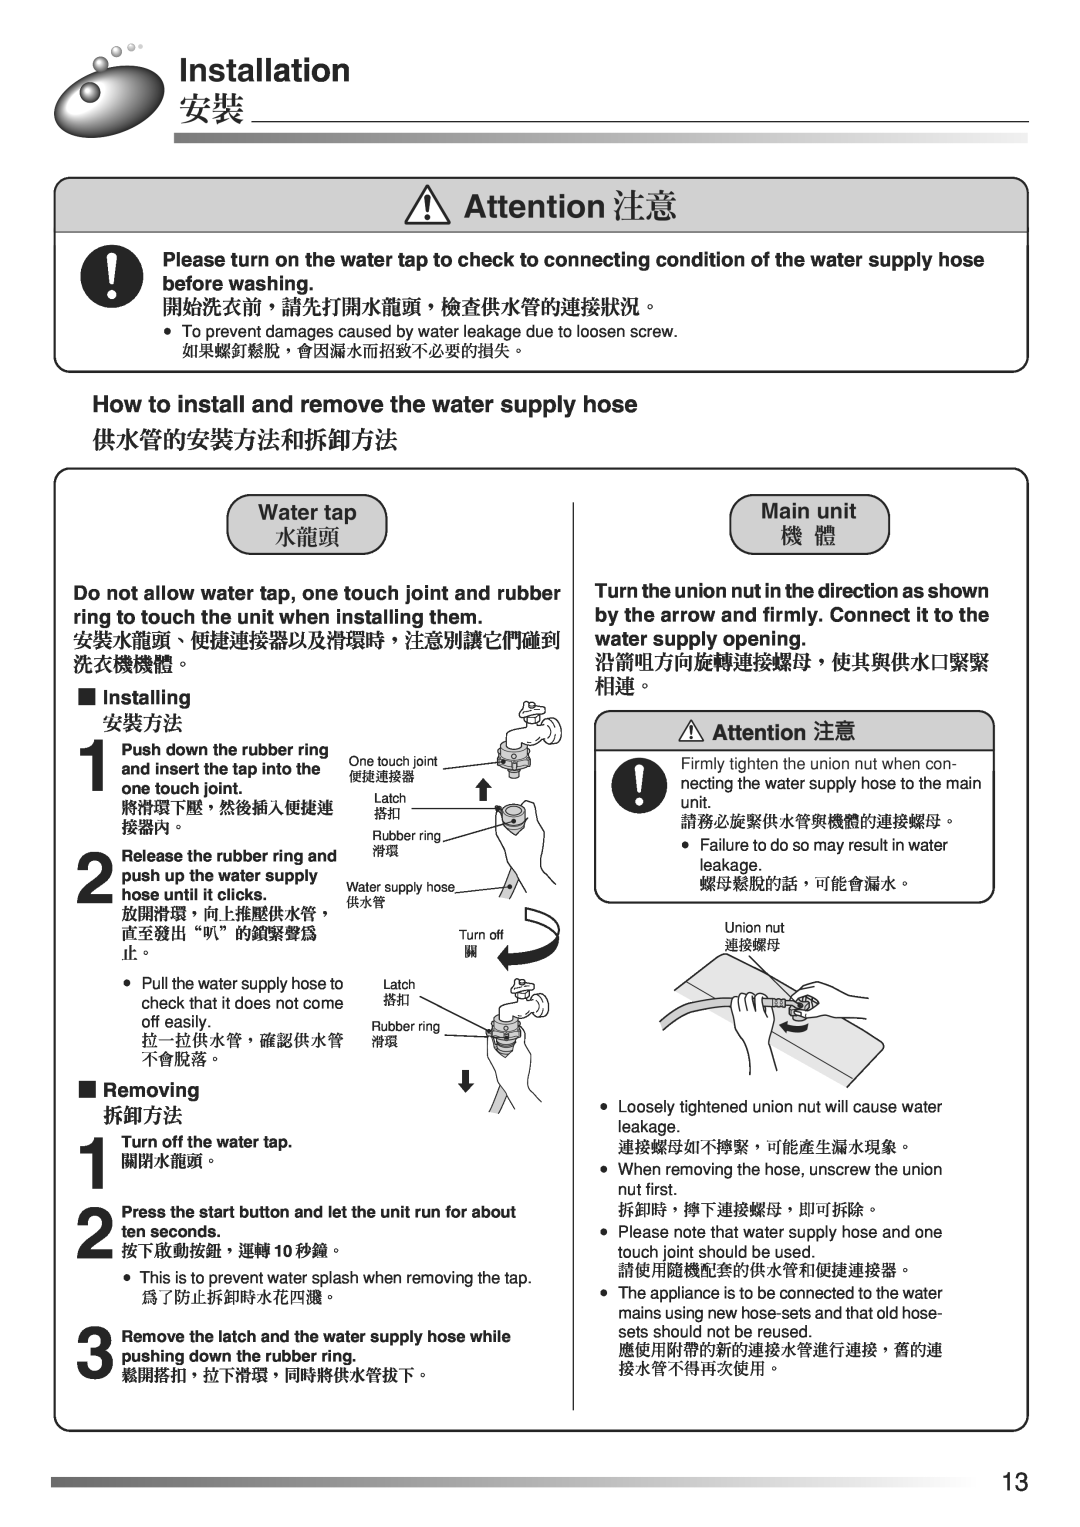 Hitachi AJ-S65KXP, AJ-S70KXP How to install and remove the water supply hose, 供水管的安裝方法和拆卸方法, Attention 注意, Installation 